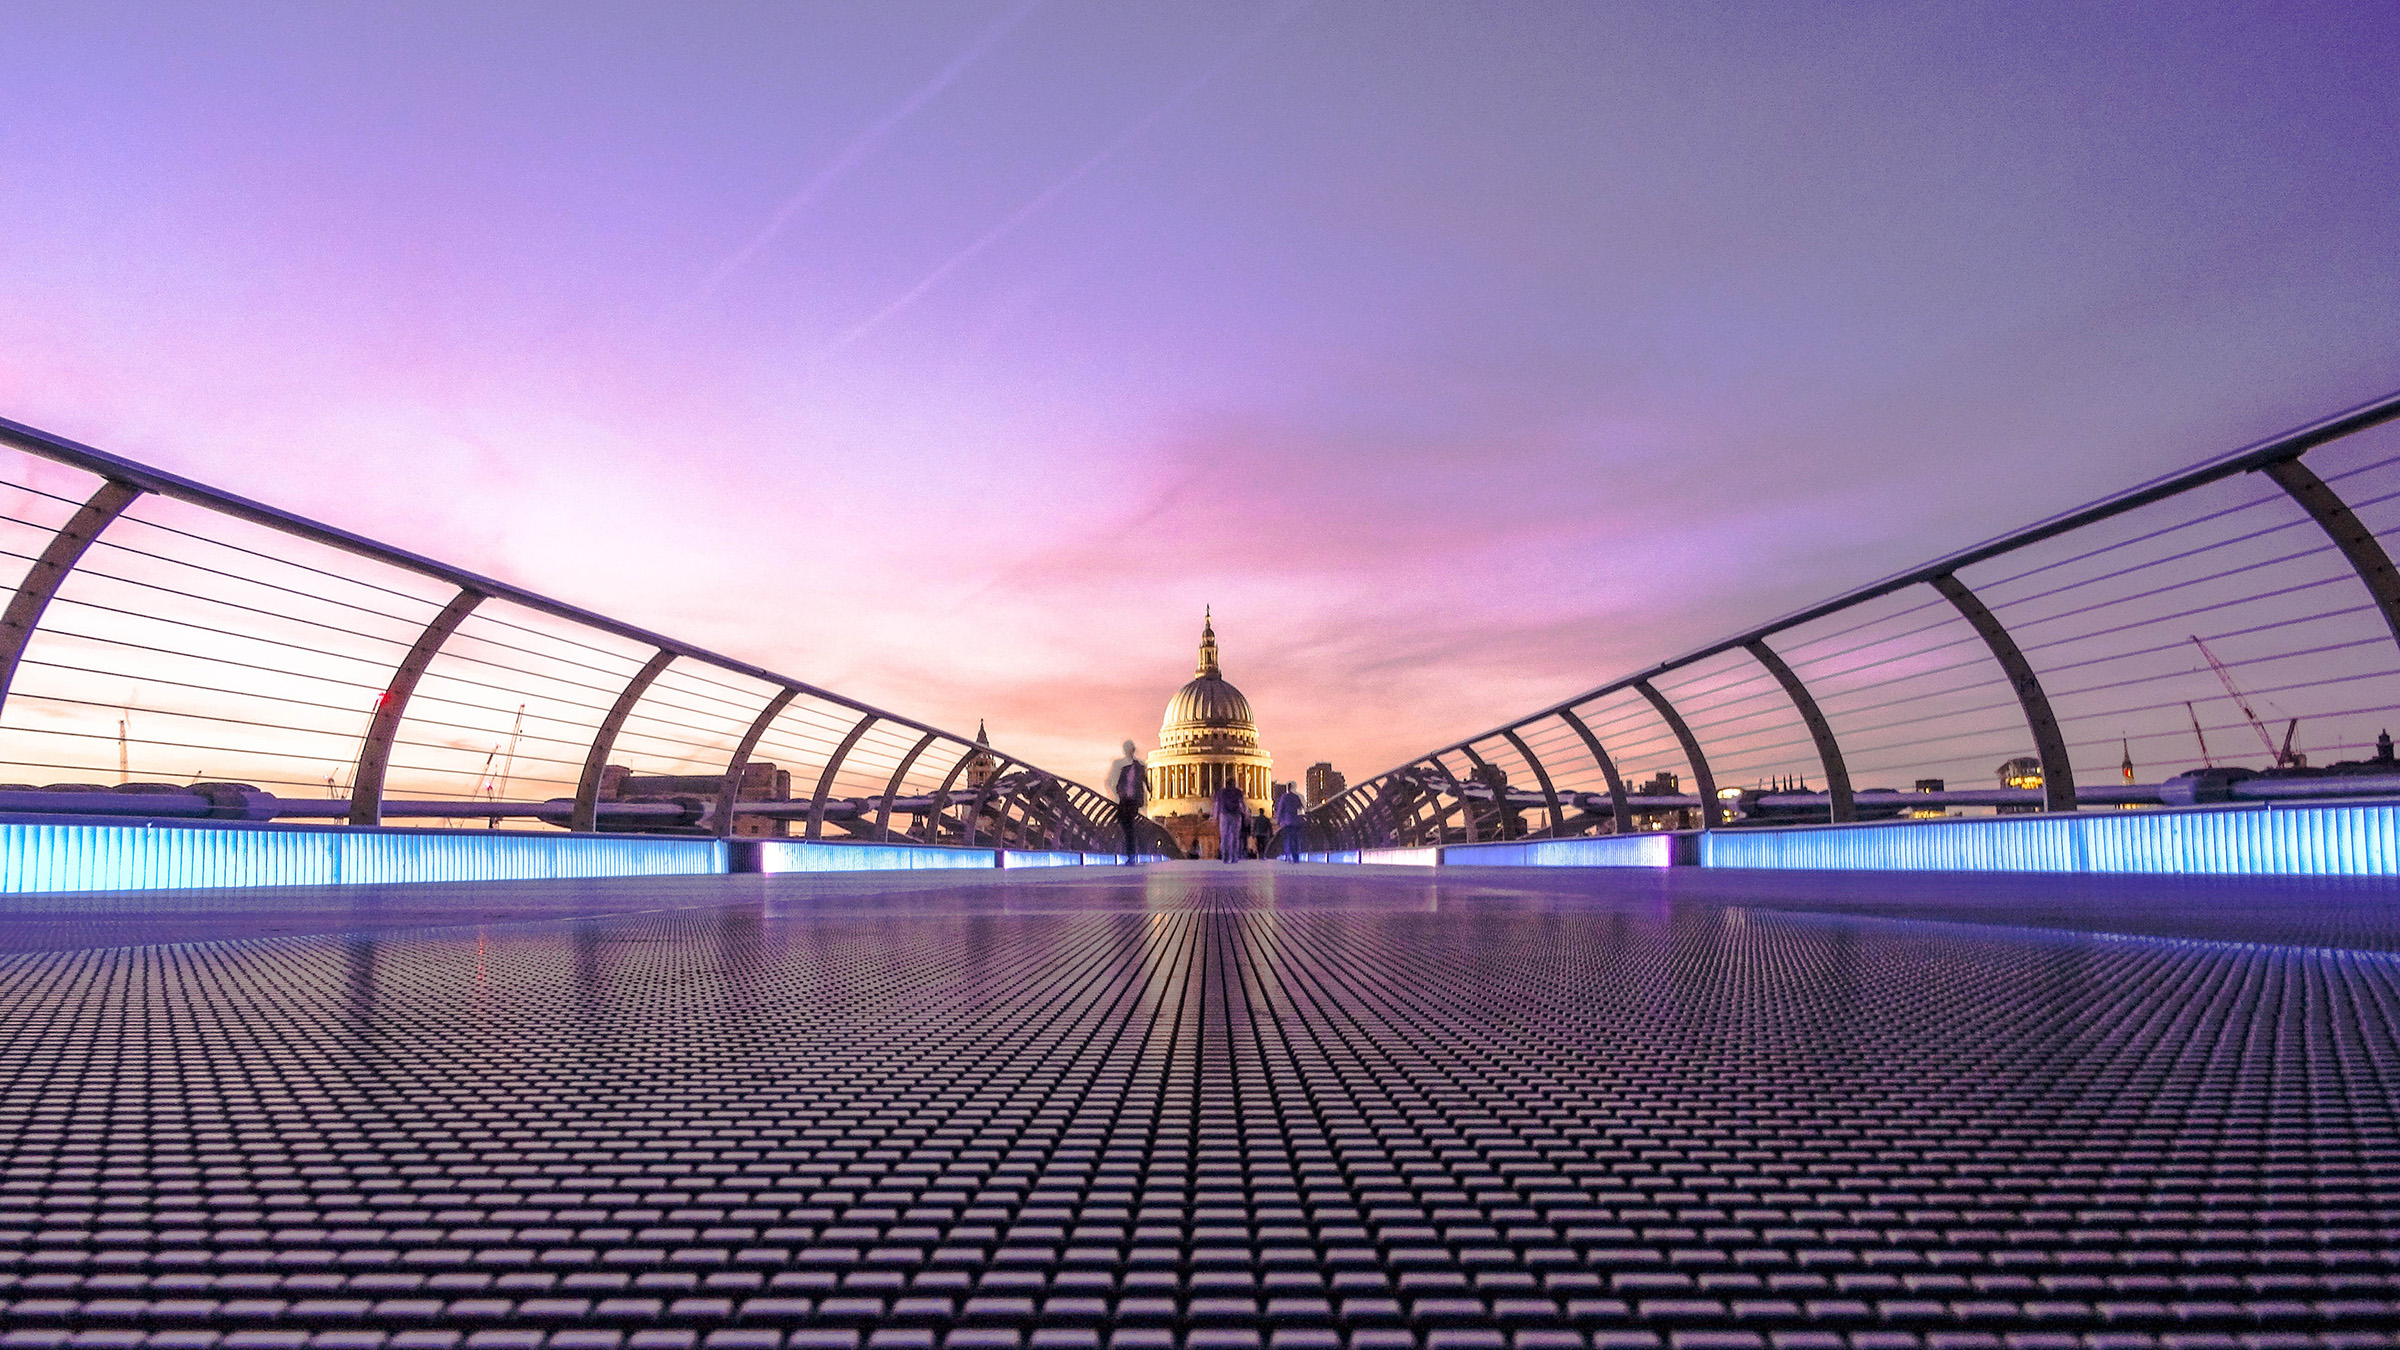 Photograph of St Pauls Cathedral taken from the Millennium Bridge London